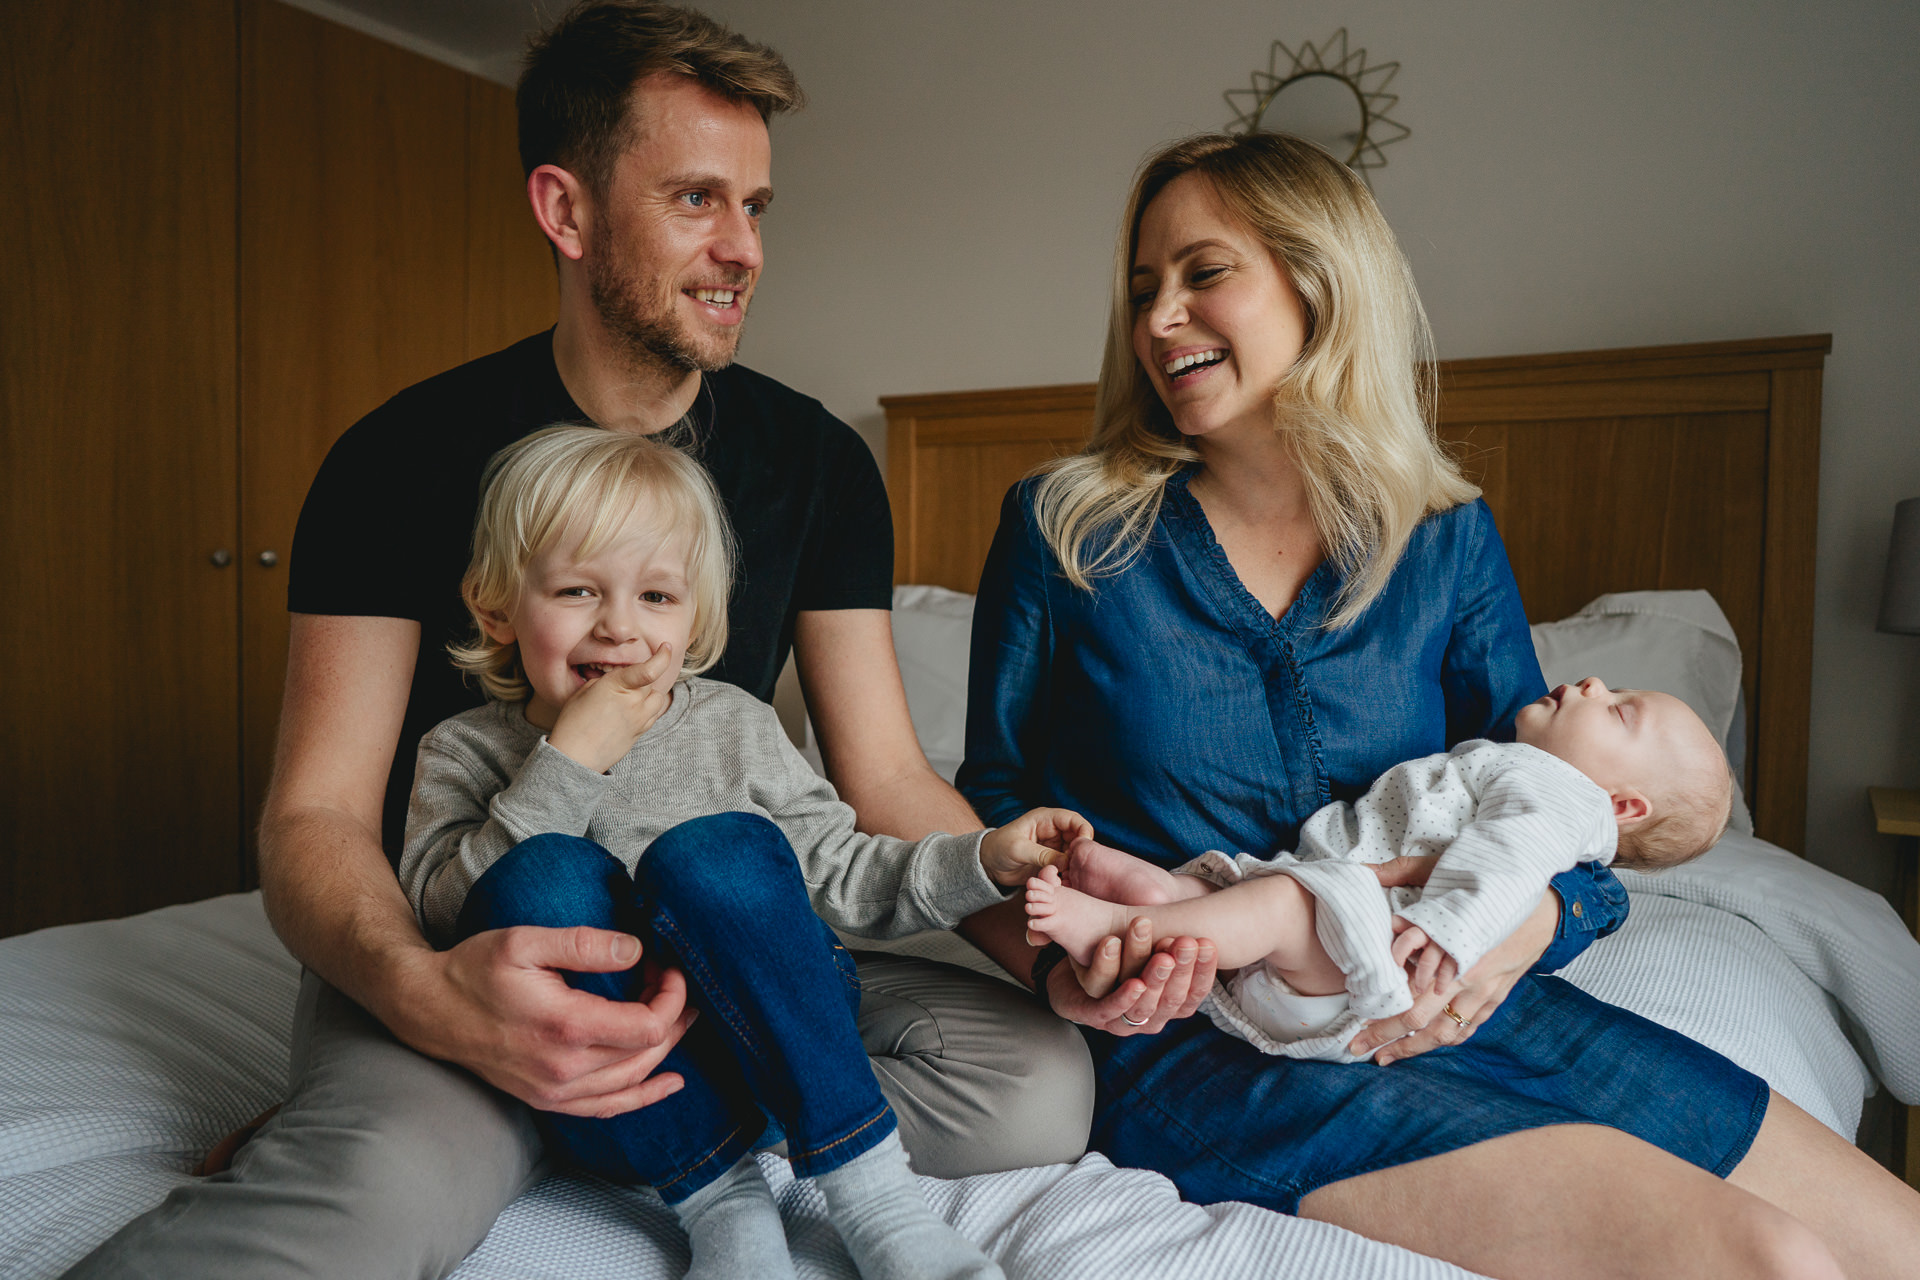 Mum, Dad, young boy and baby laughing on a bed together